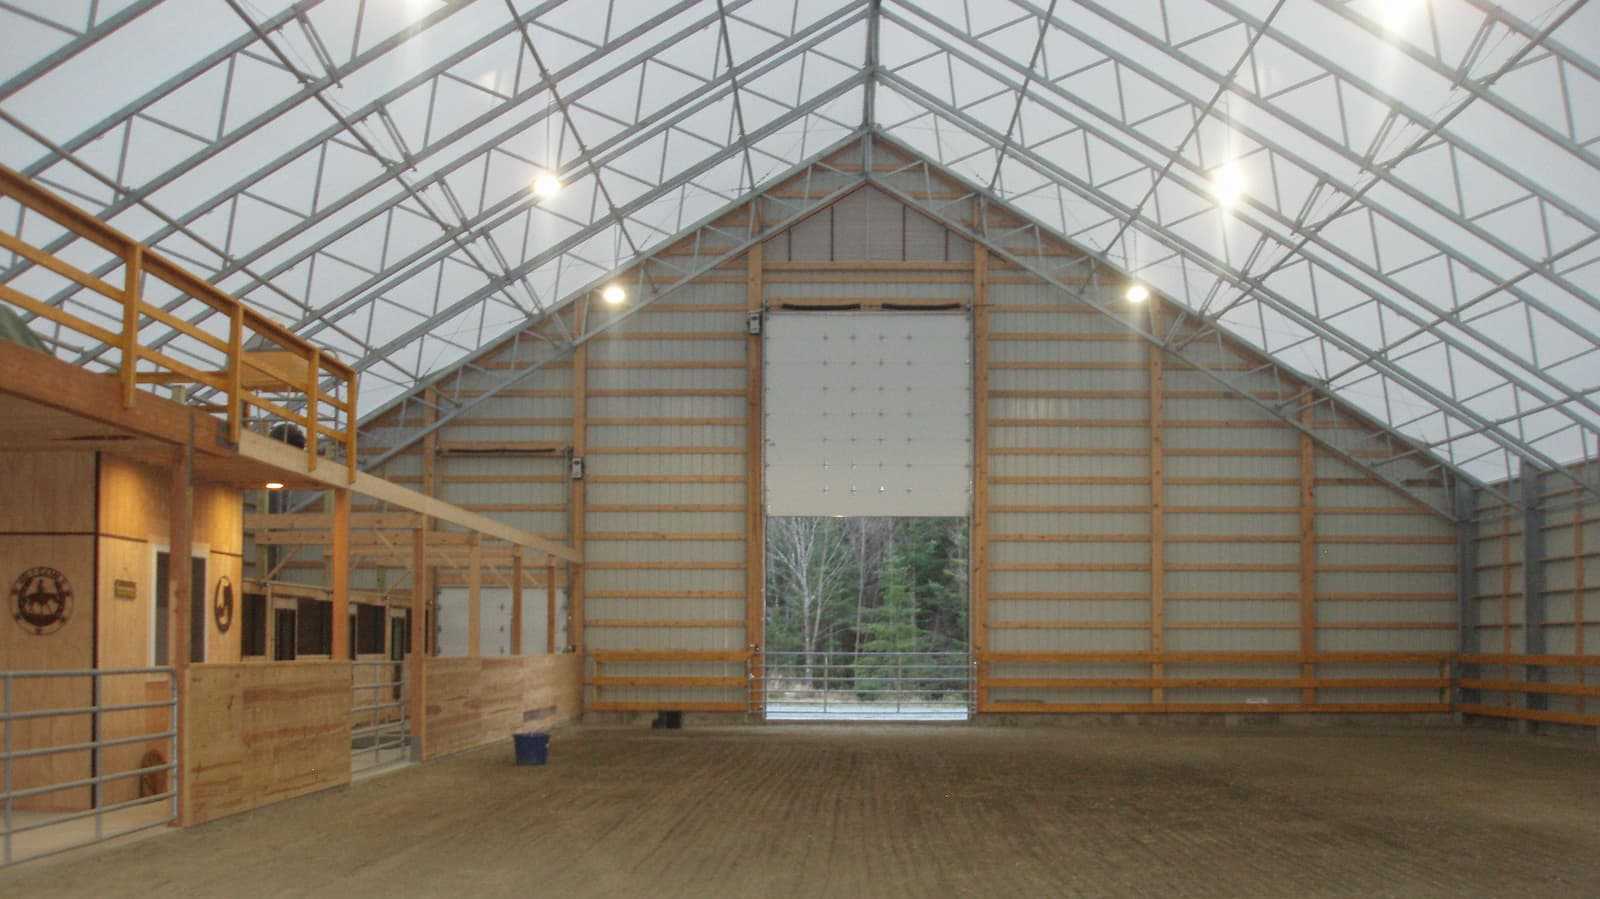 Interior of a 85’ x 120’ fabric roof riding arena.